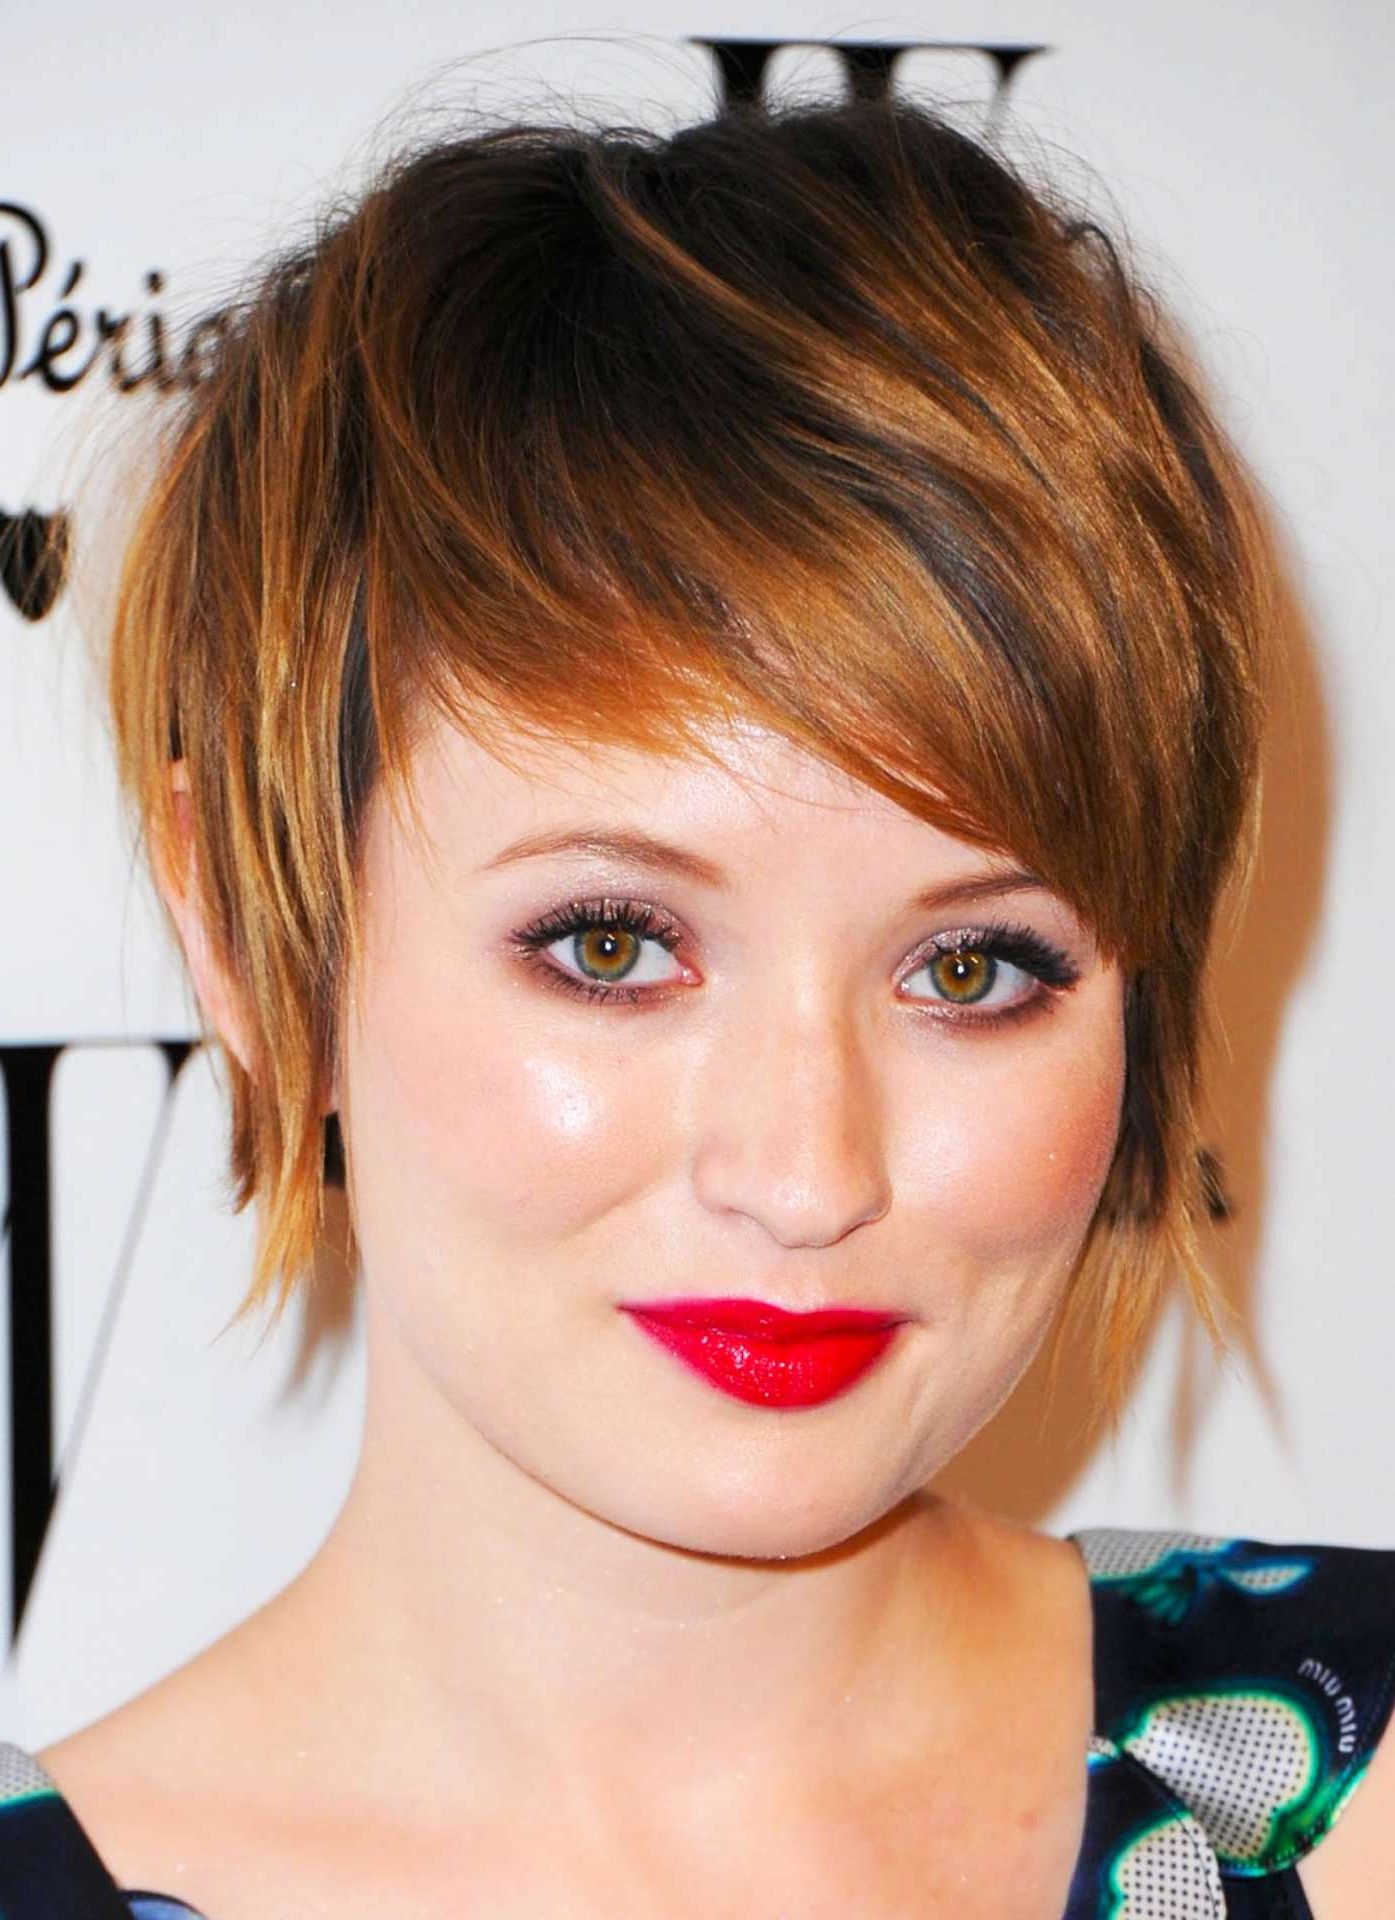 14 Best Short Haircuts For Women With Round Faces Fresh Short Pertaining To Short Hairstyles For Chubby Faces (View 14 of 25)